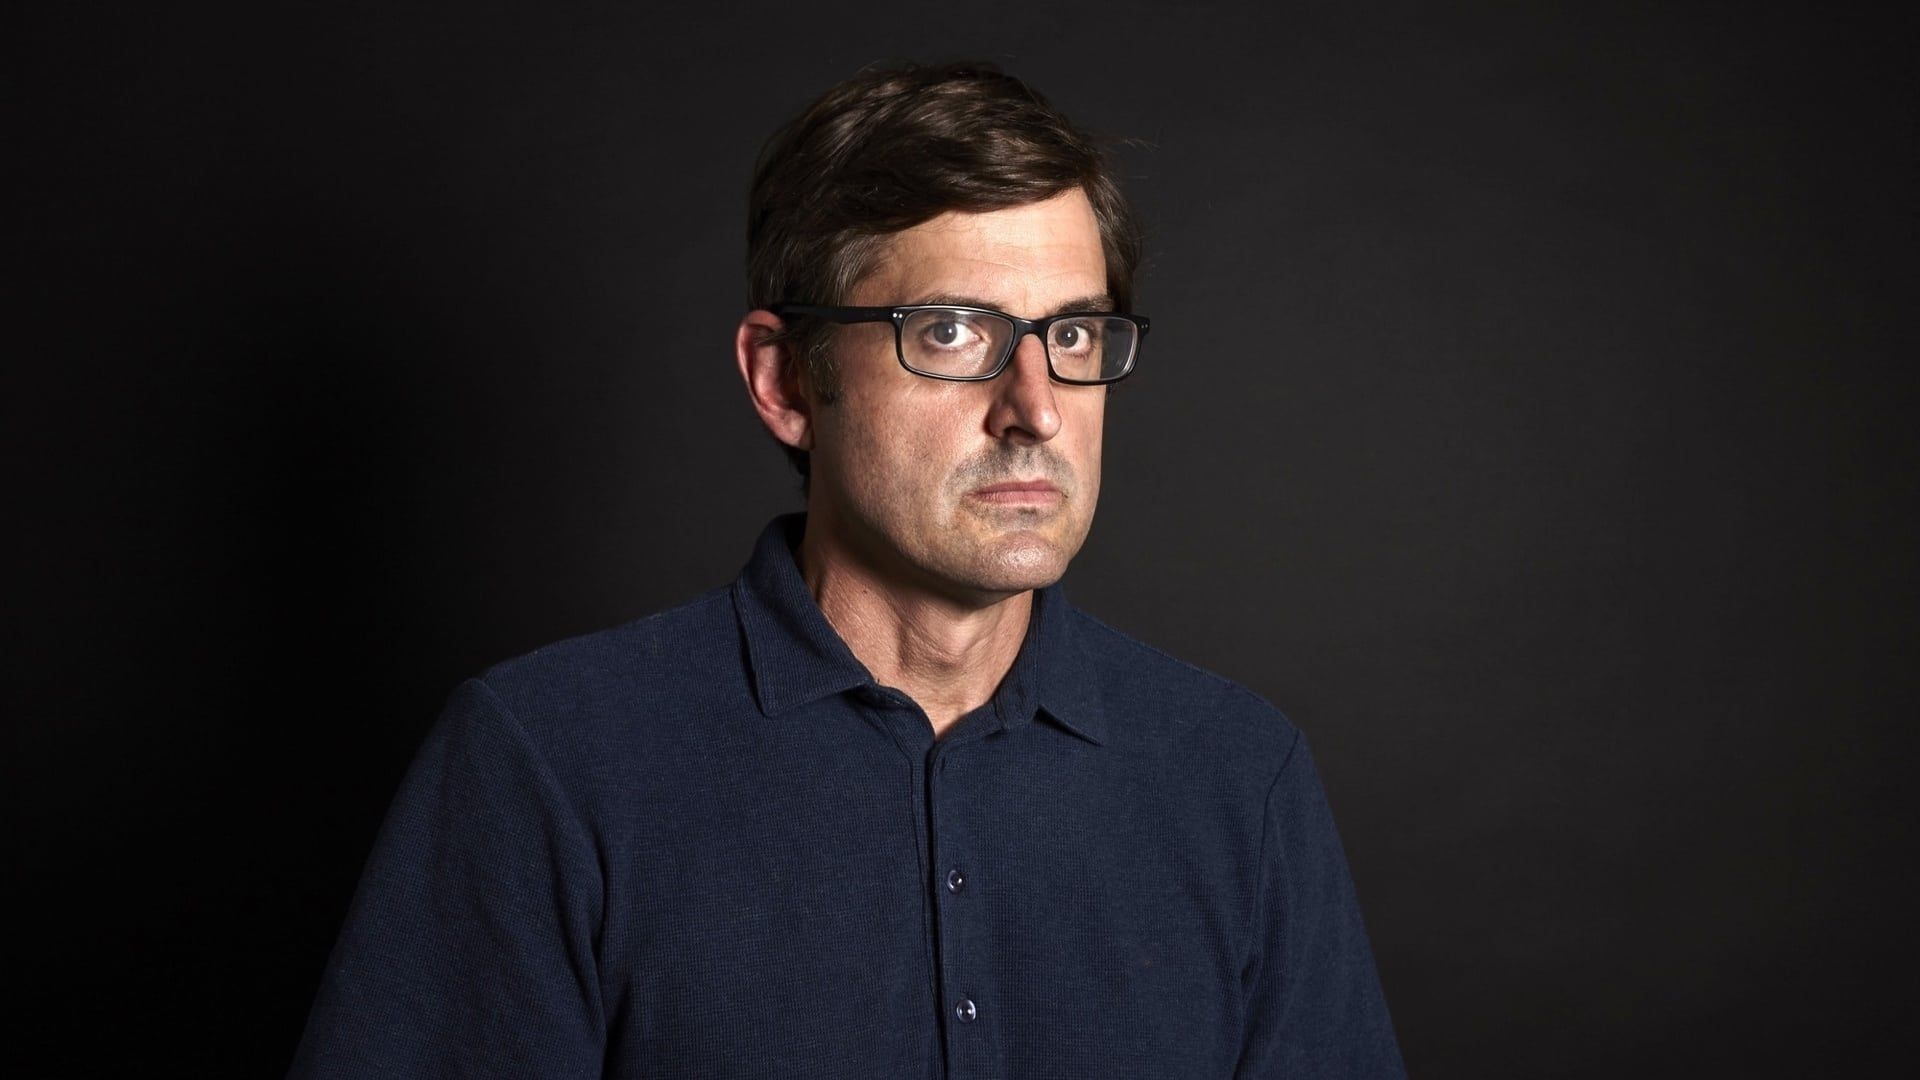 The Weird World of Louis Theroux background